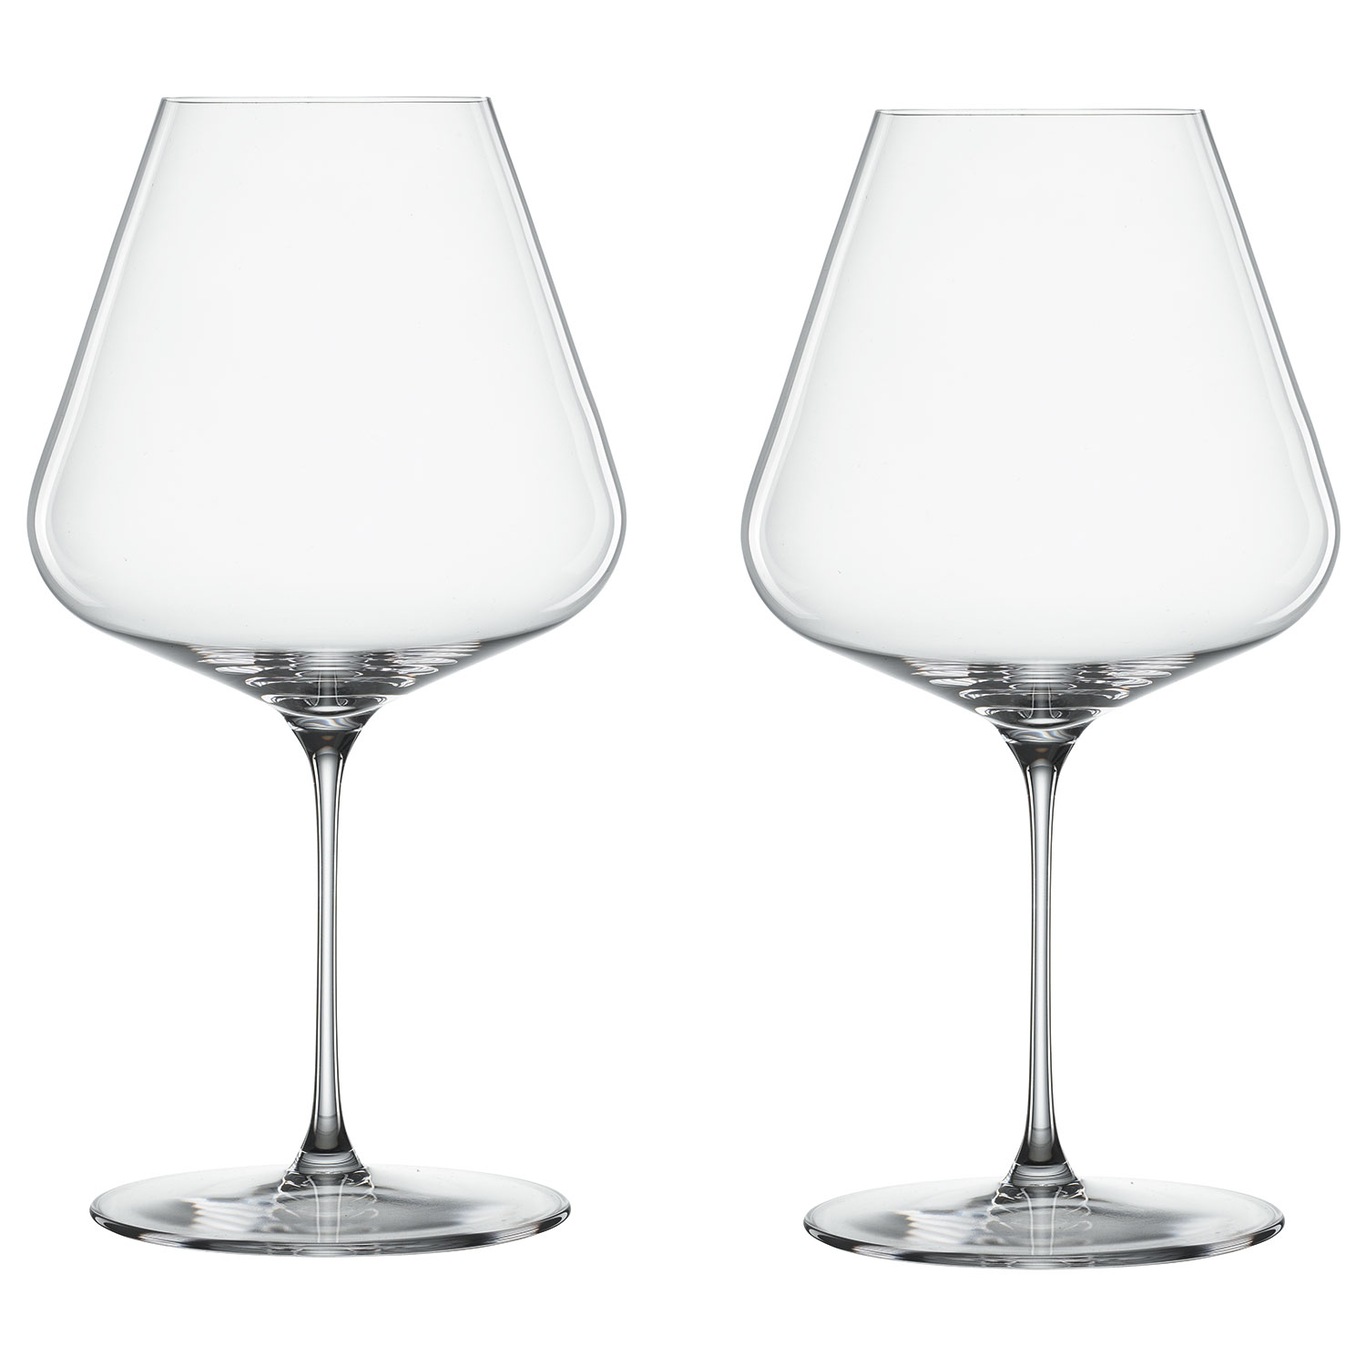 Definition Burgundy Wine Glass 96 cl, 2-pack